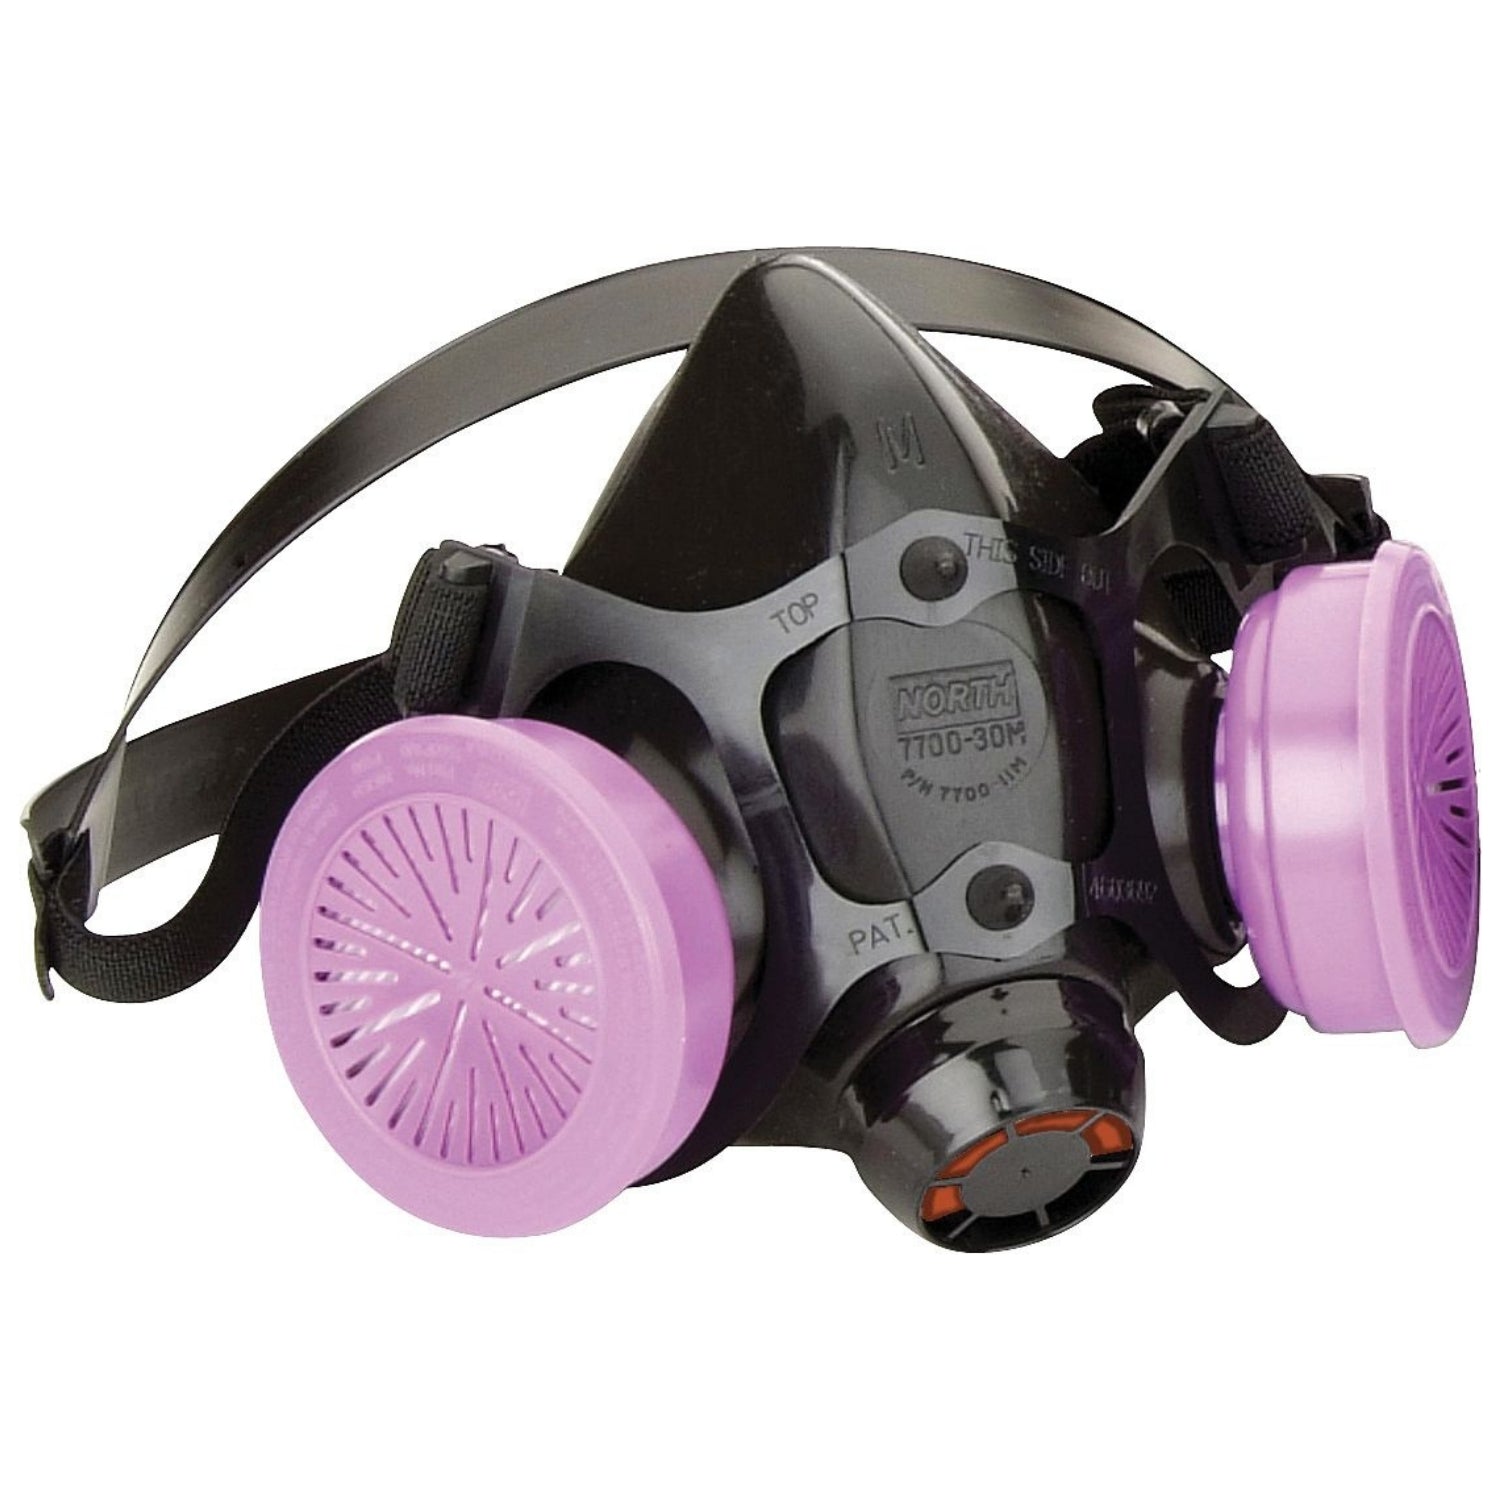 HONEYWELL  7700 Series Half Mask Respirator - Resists Particulates, Chemical, Contamination and Gas, Cradle Suspension, Silicone - Size Small